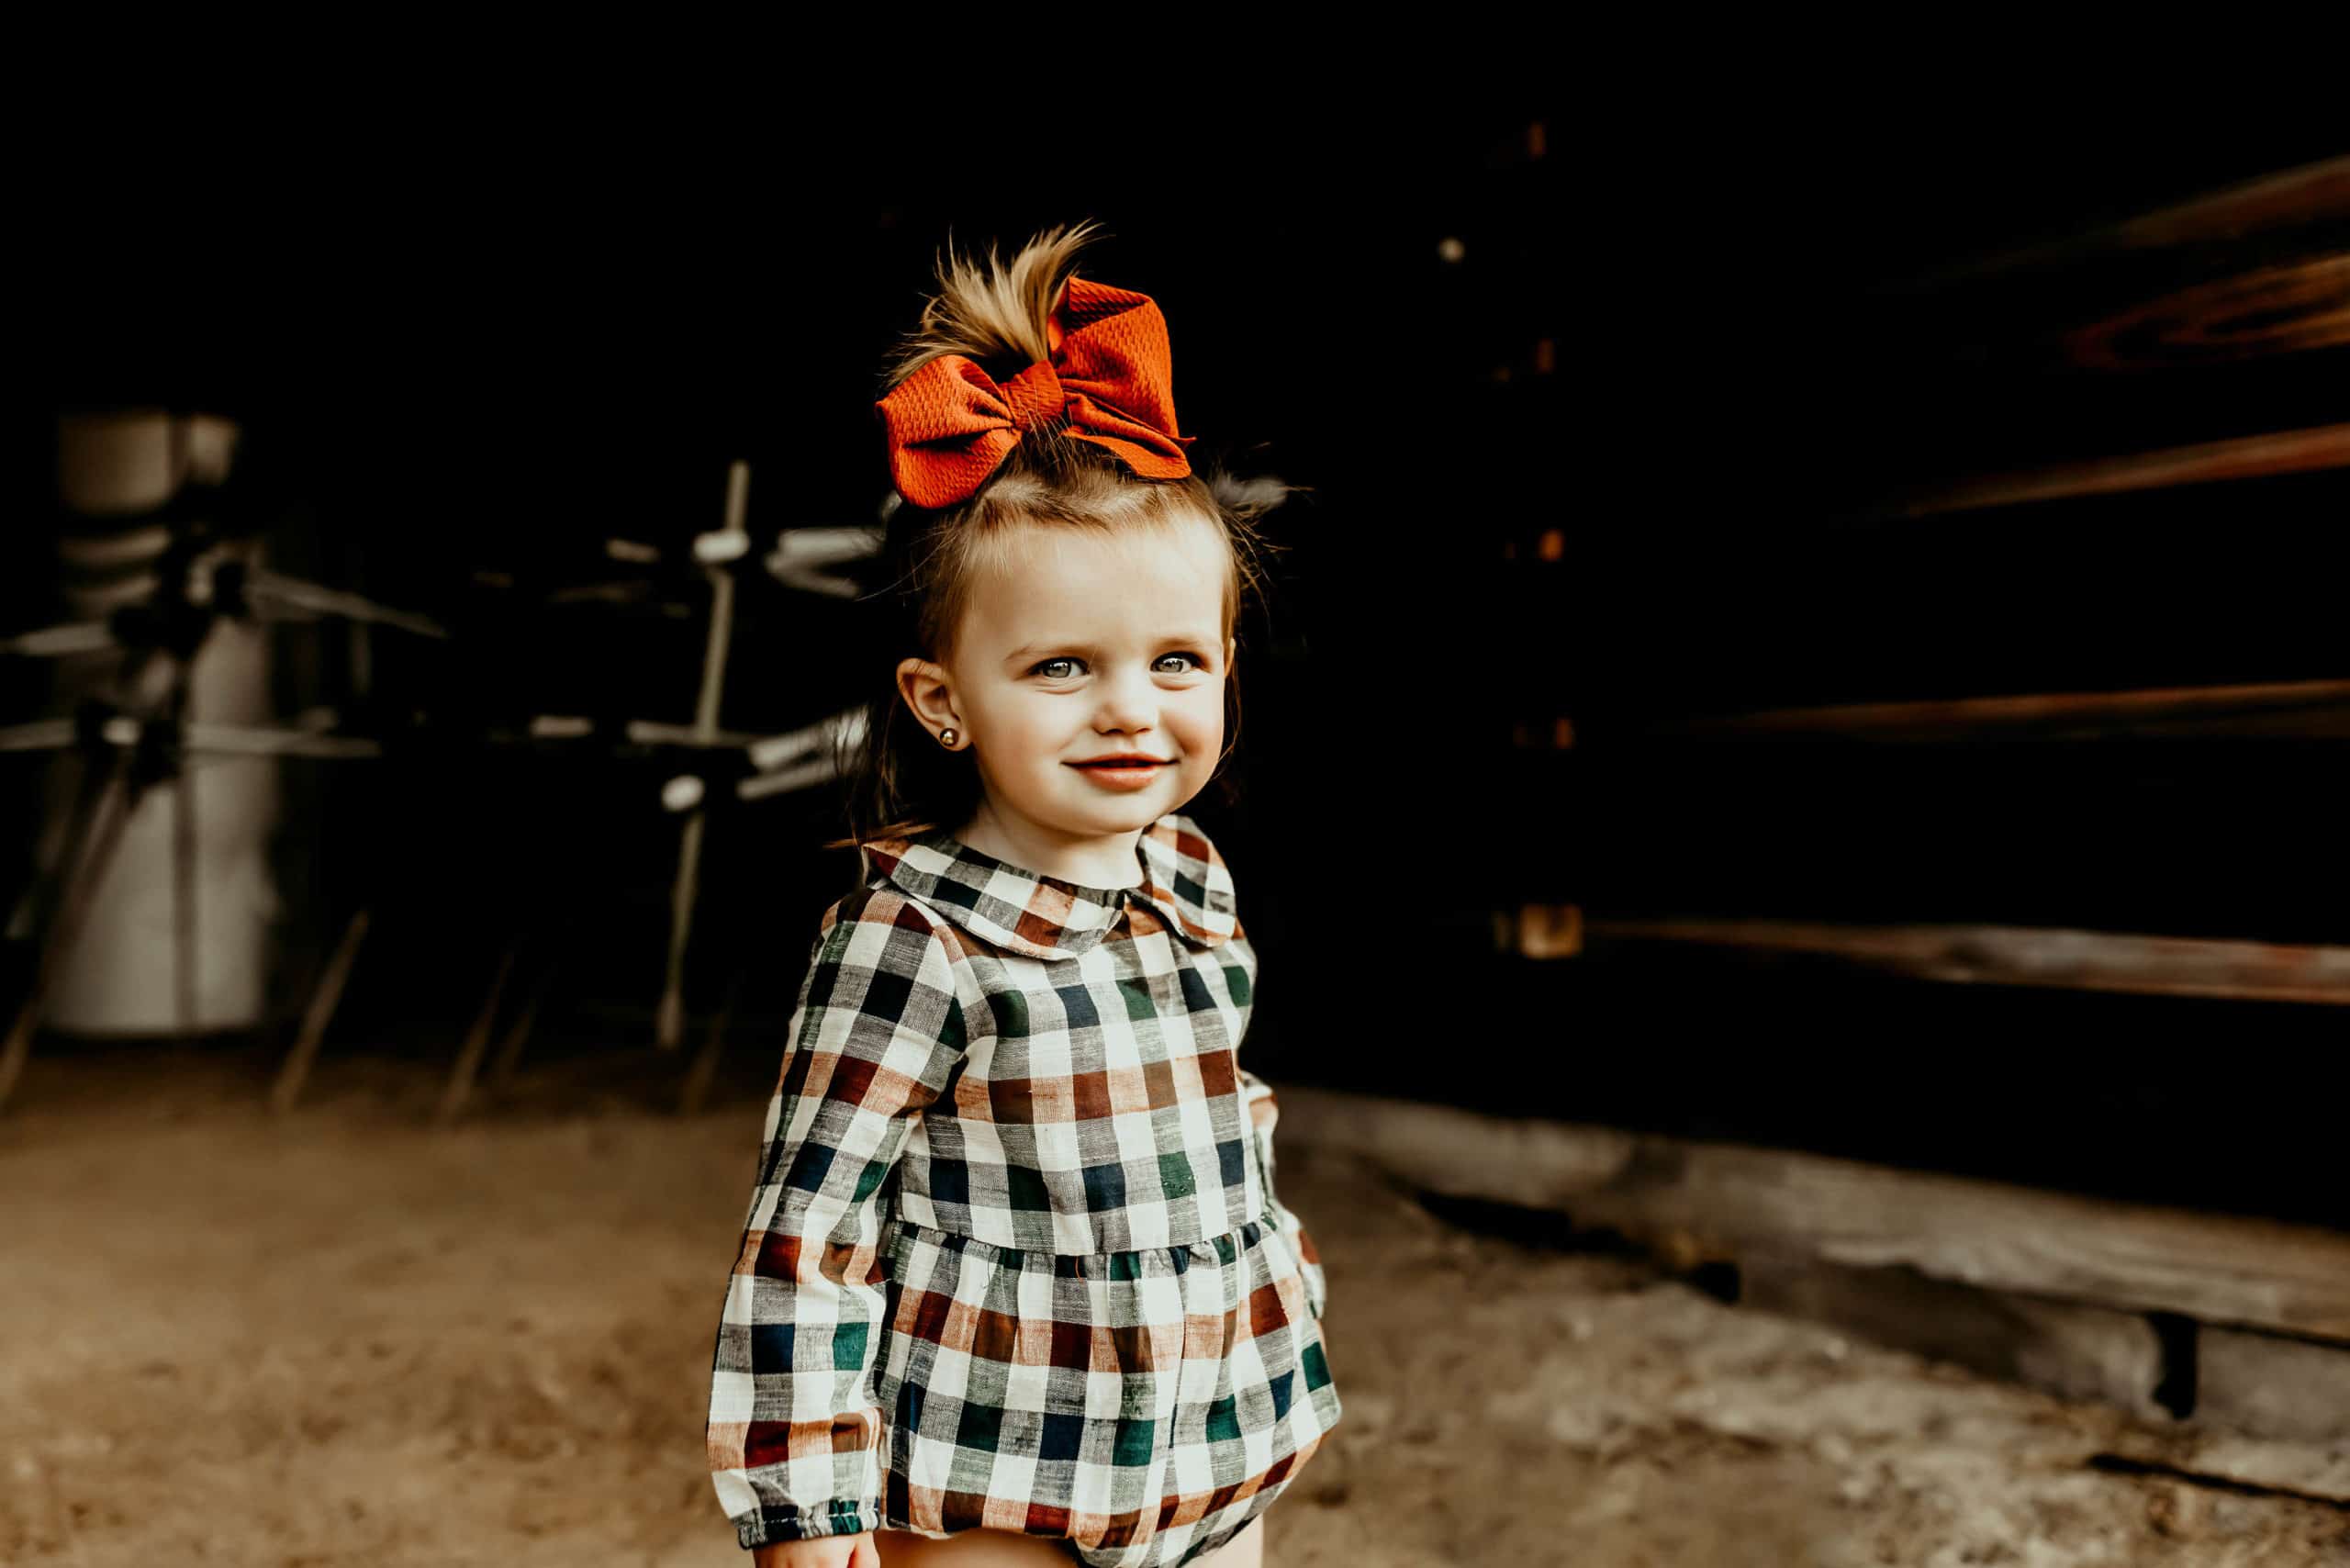 2 year old little girl in a blue and orange plaid romper with a big orange bow in her hair captured by Warner Robins photographer.